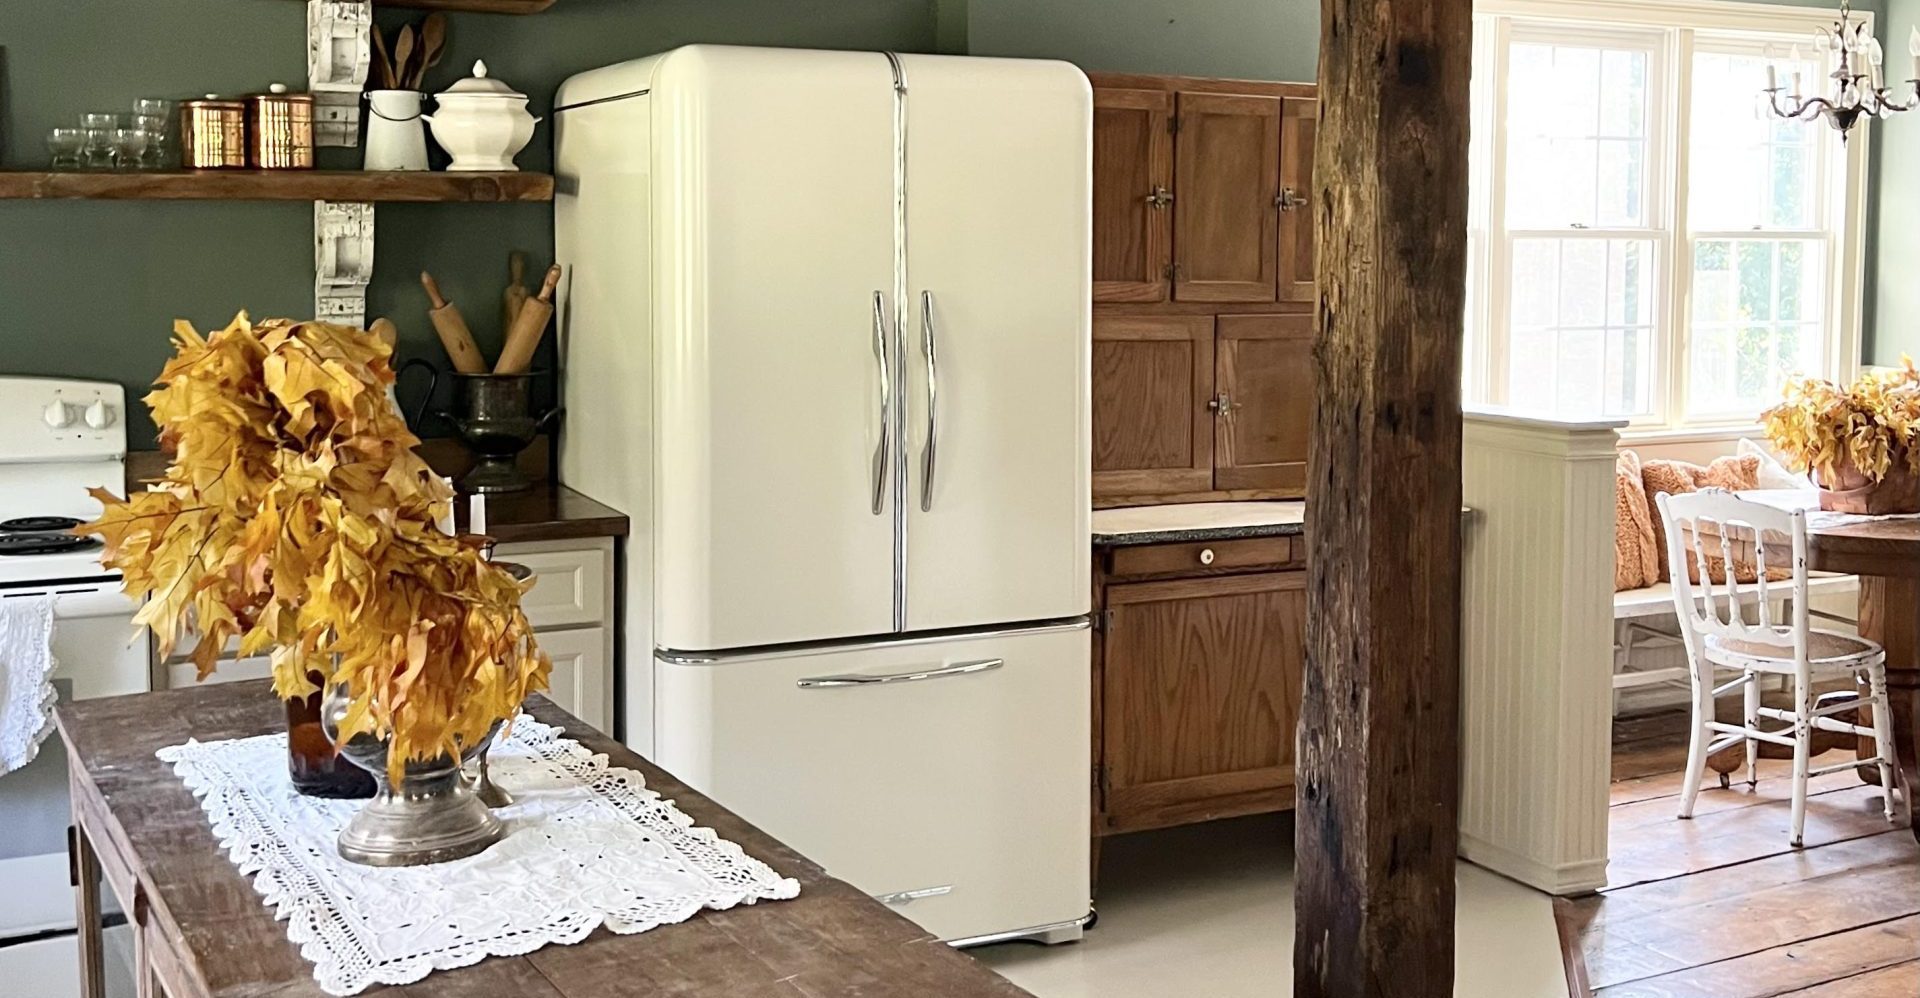 Bisque northstar fridge from Elmria Stove Works in designer Kaley Cutting's kitchen